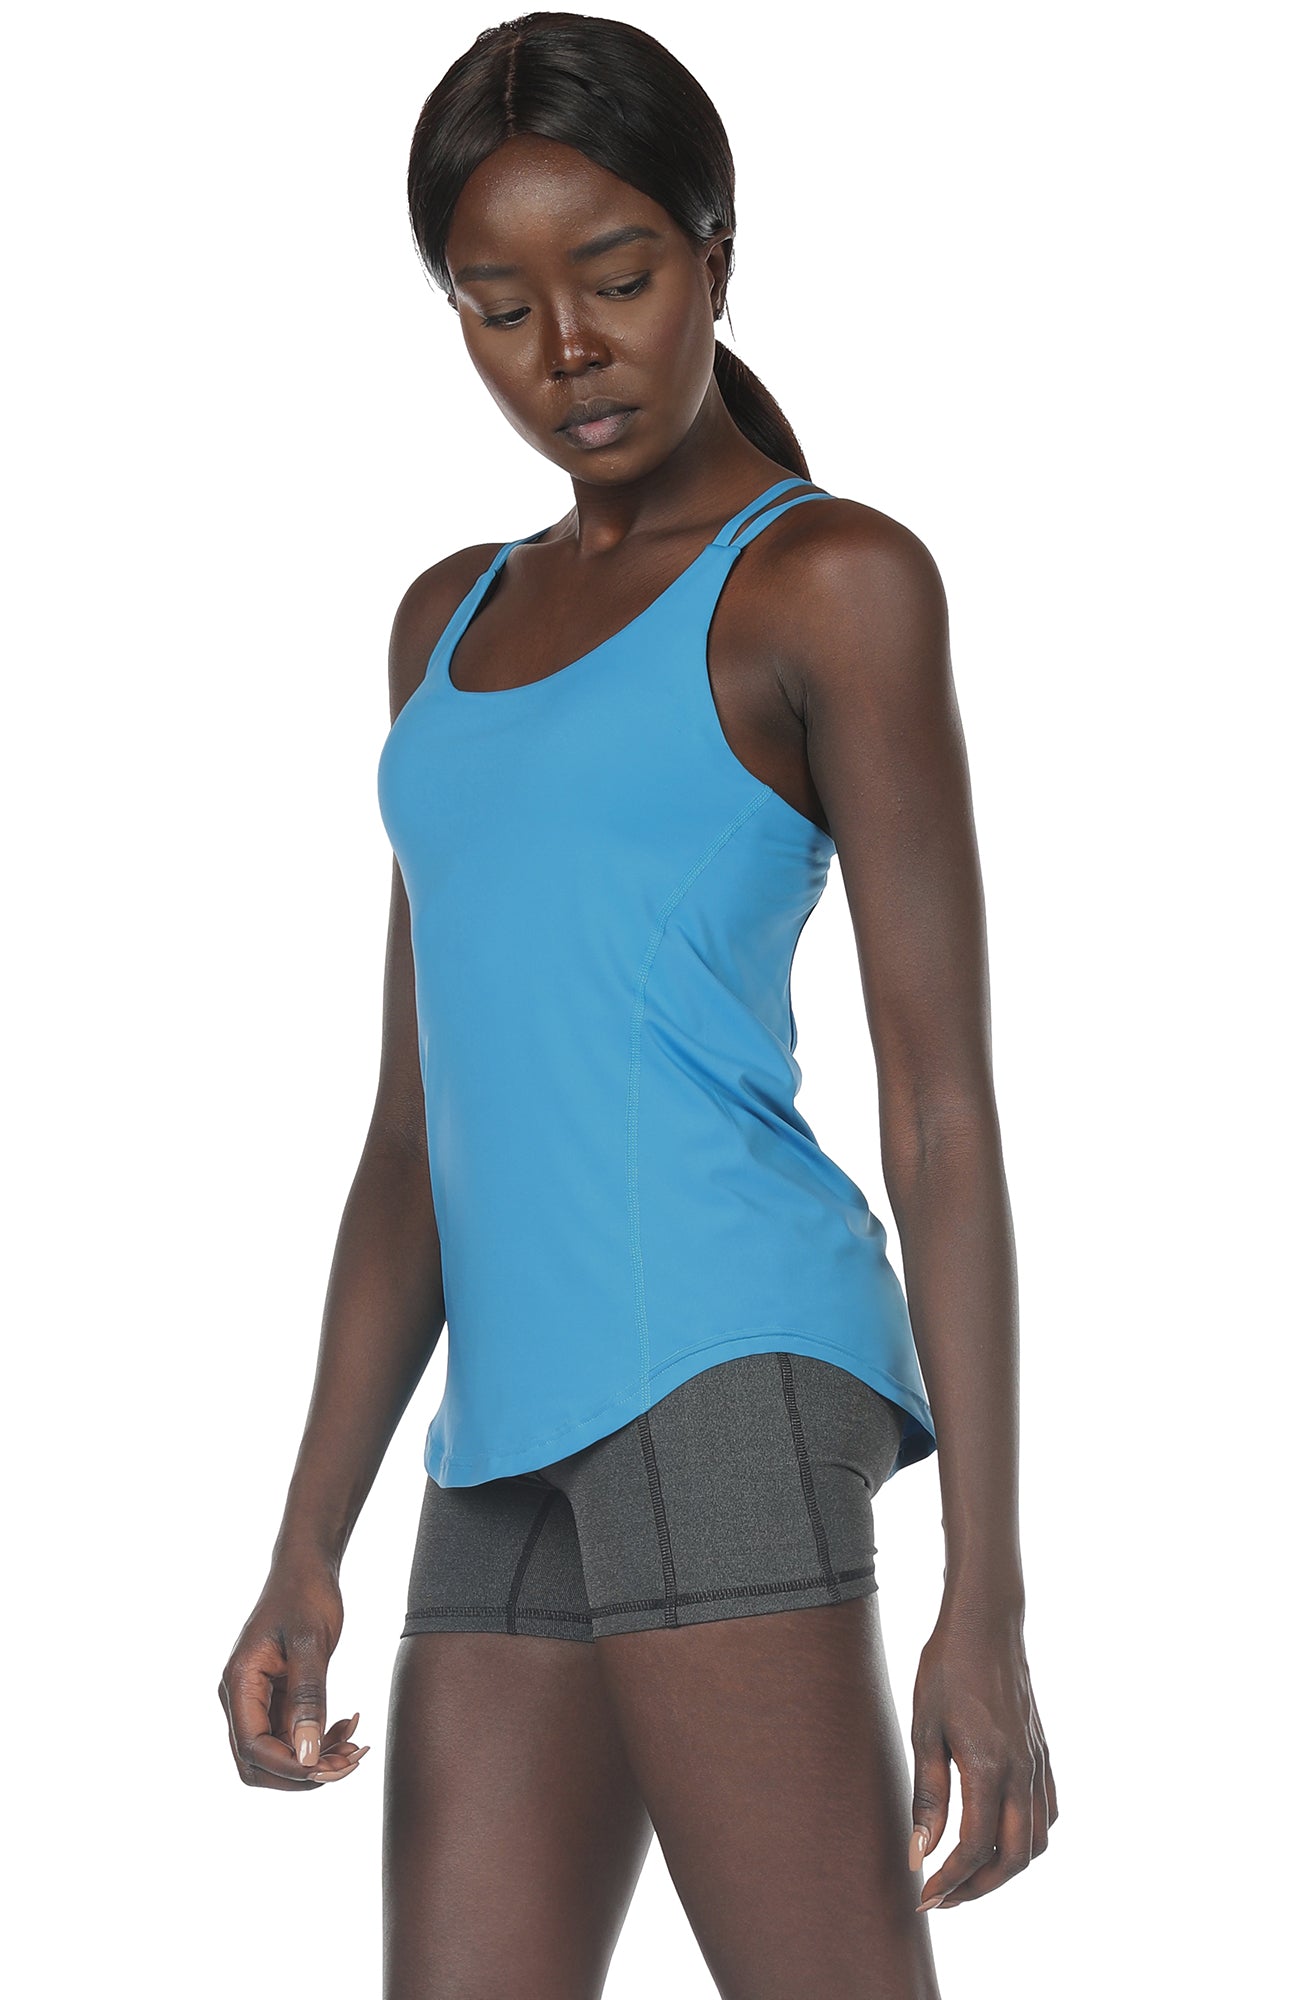 Best Deal for icyzone Workout Tank Tops Built in Bra - Women's Strappy